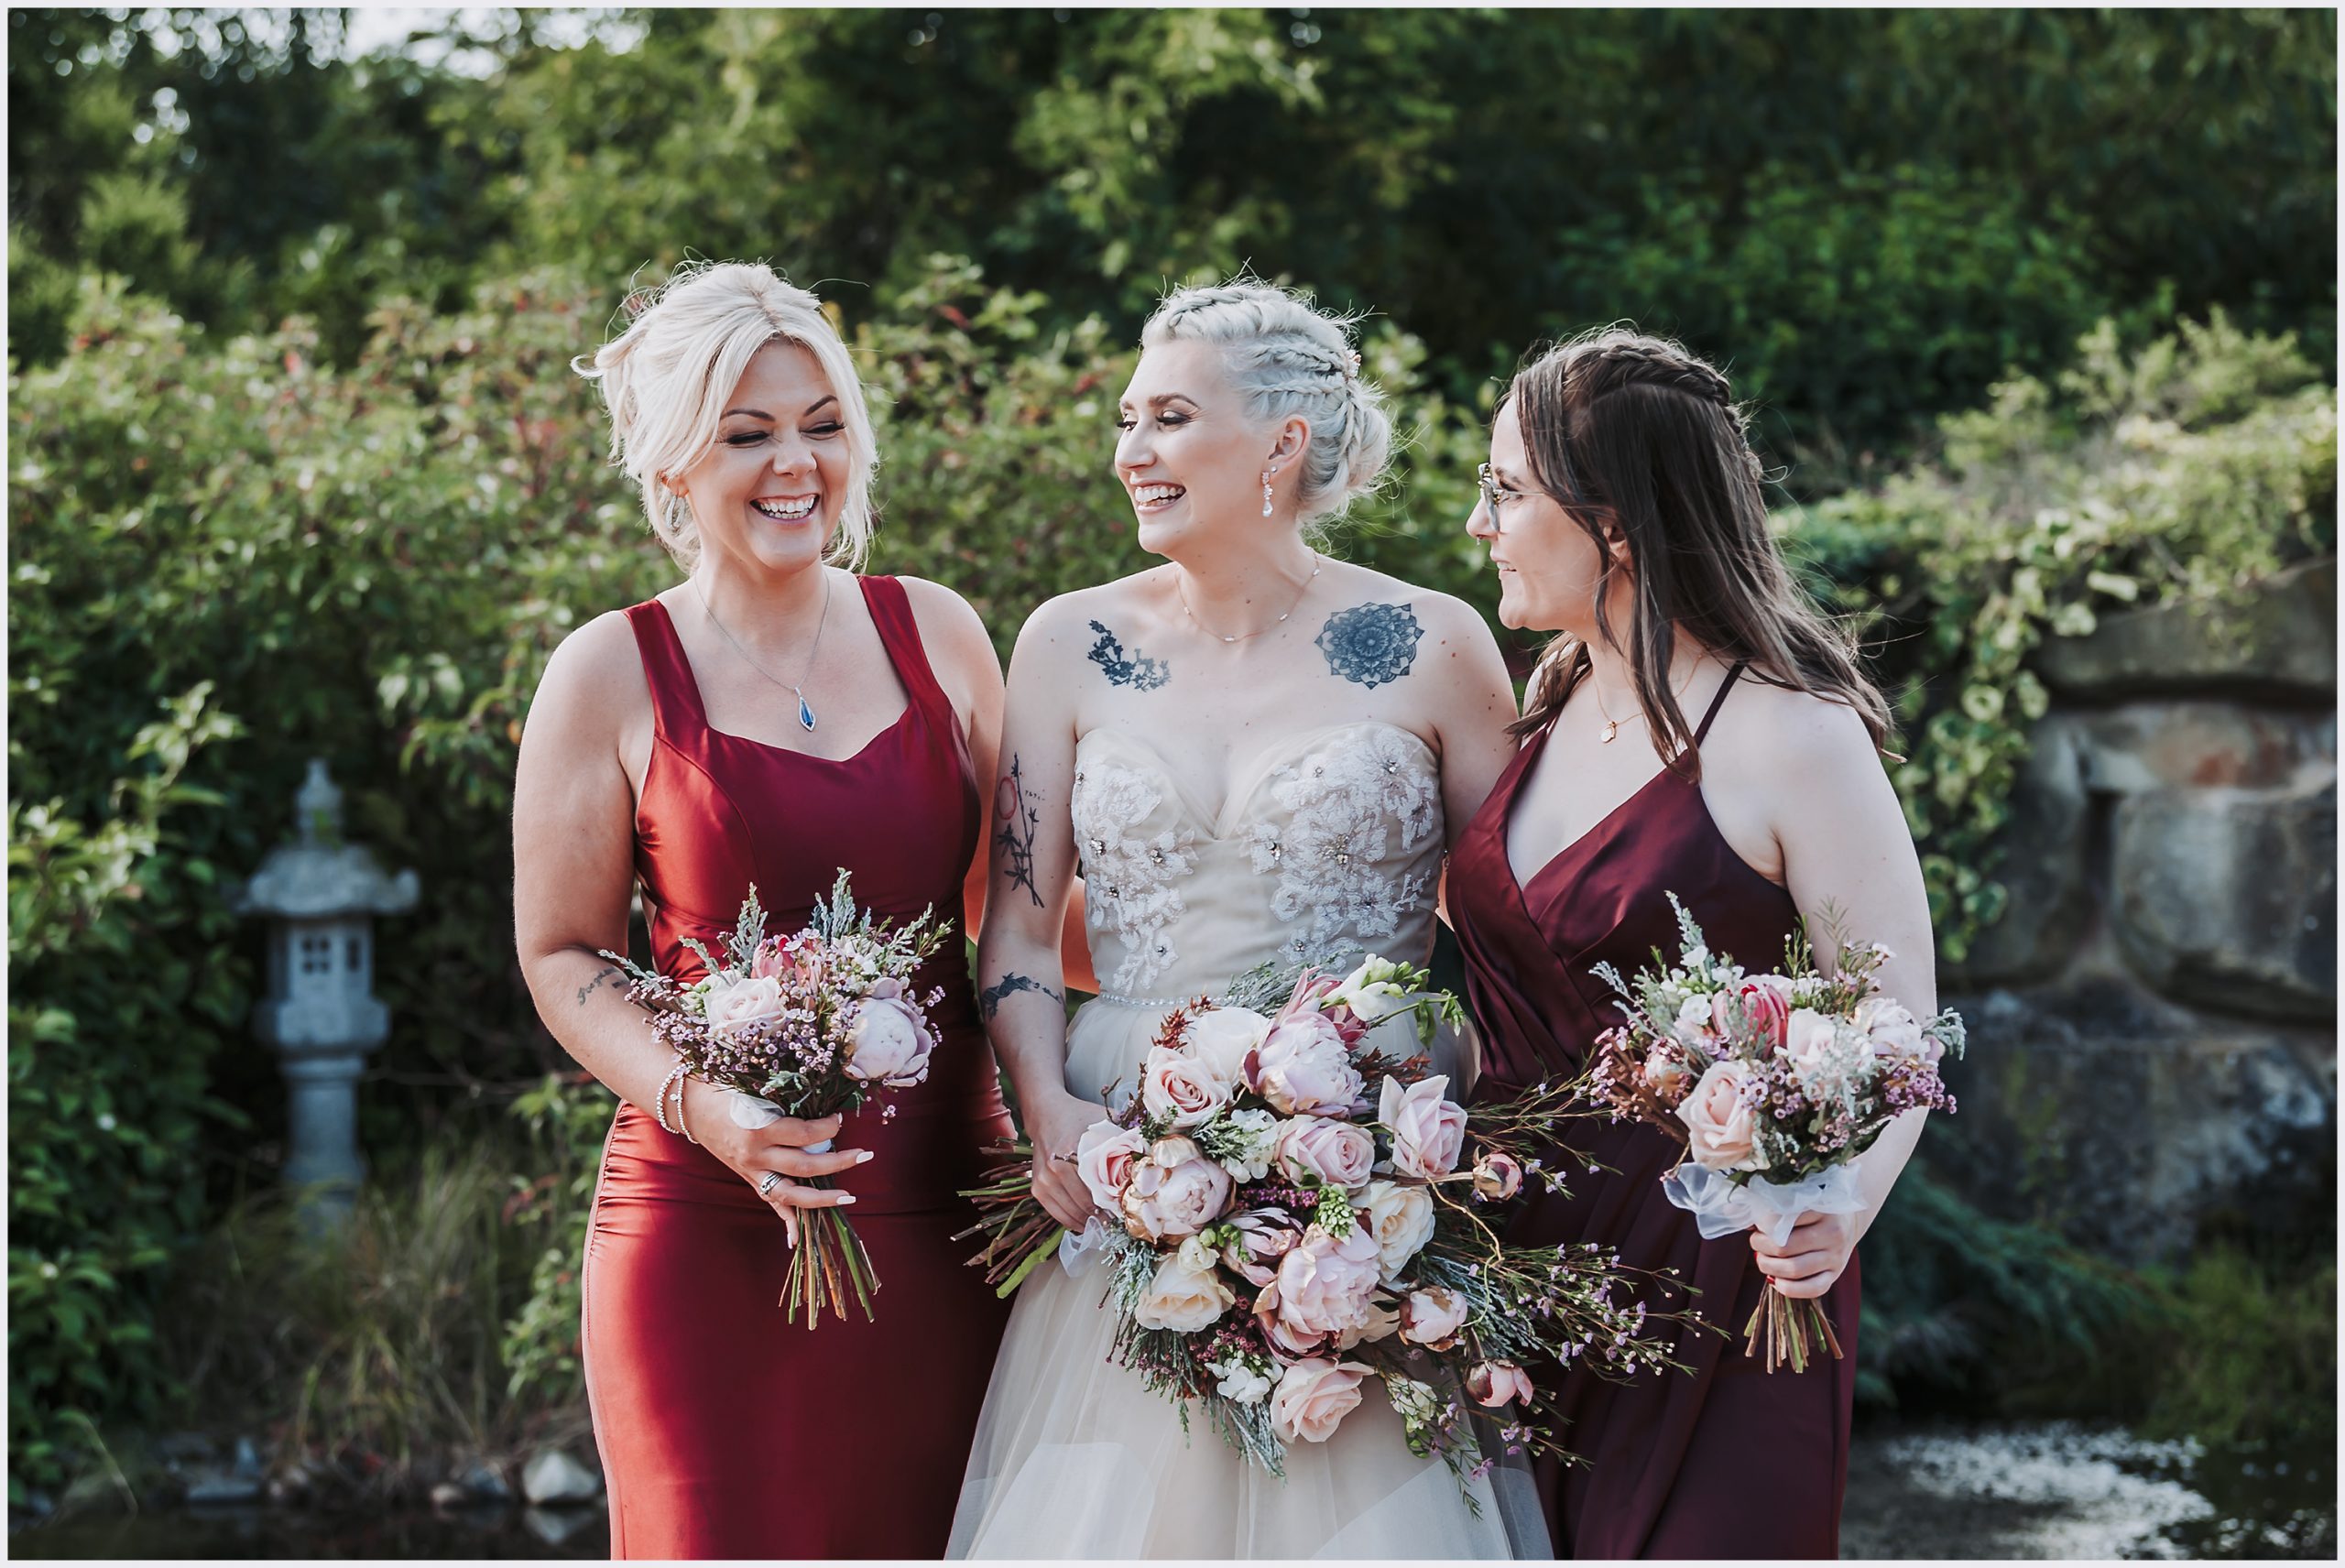 A bride and her two bridesmaids share a joke together.  The three of them are laughing and joking with each other.  tehy all hold a beautiful buoquet of flowers